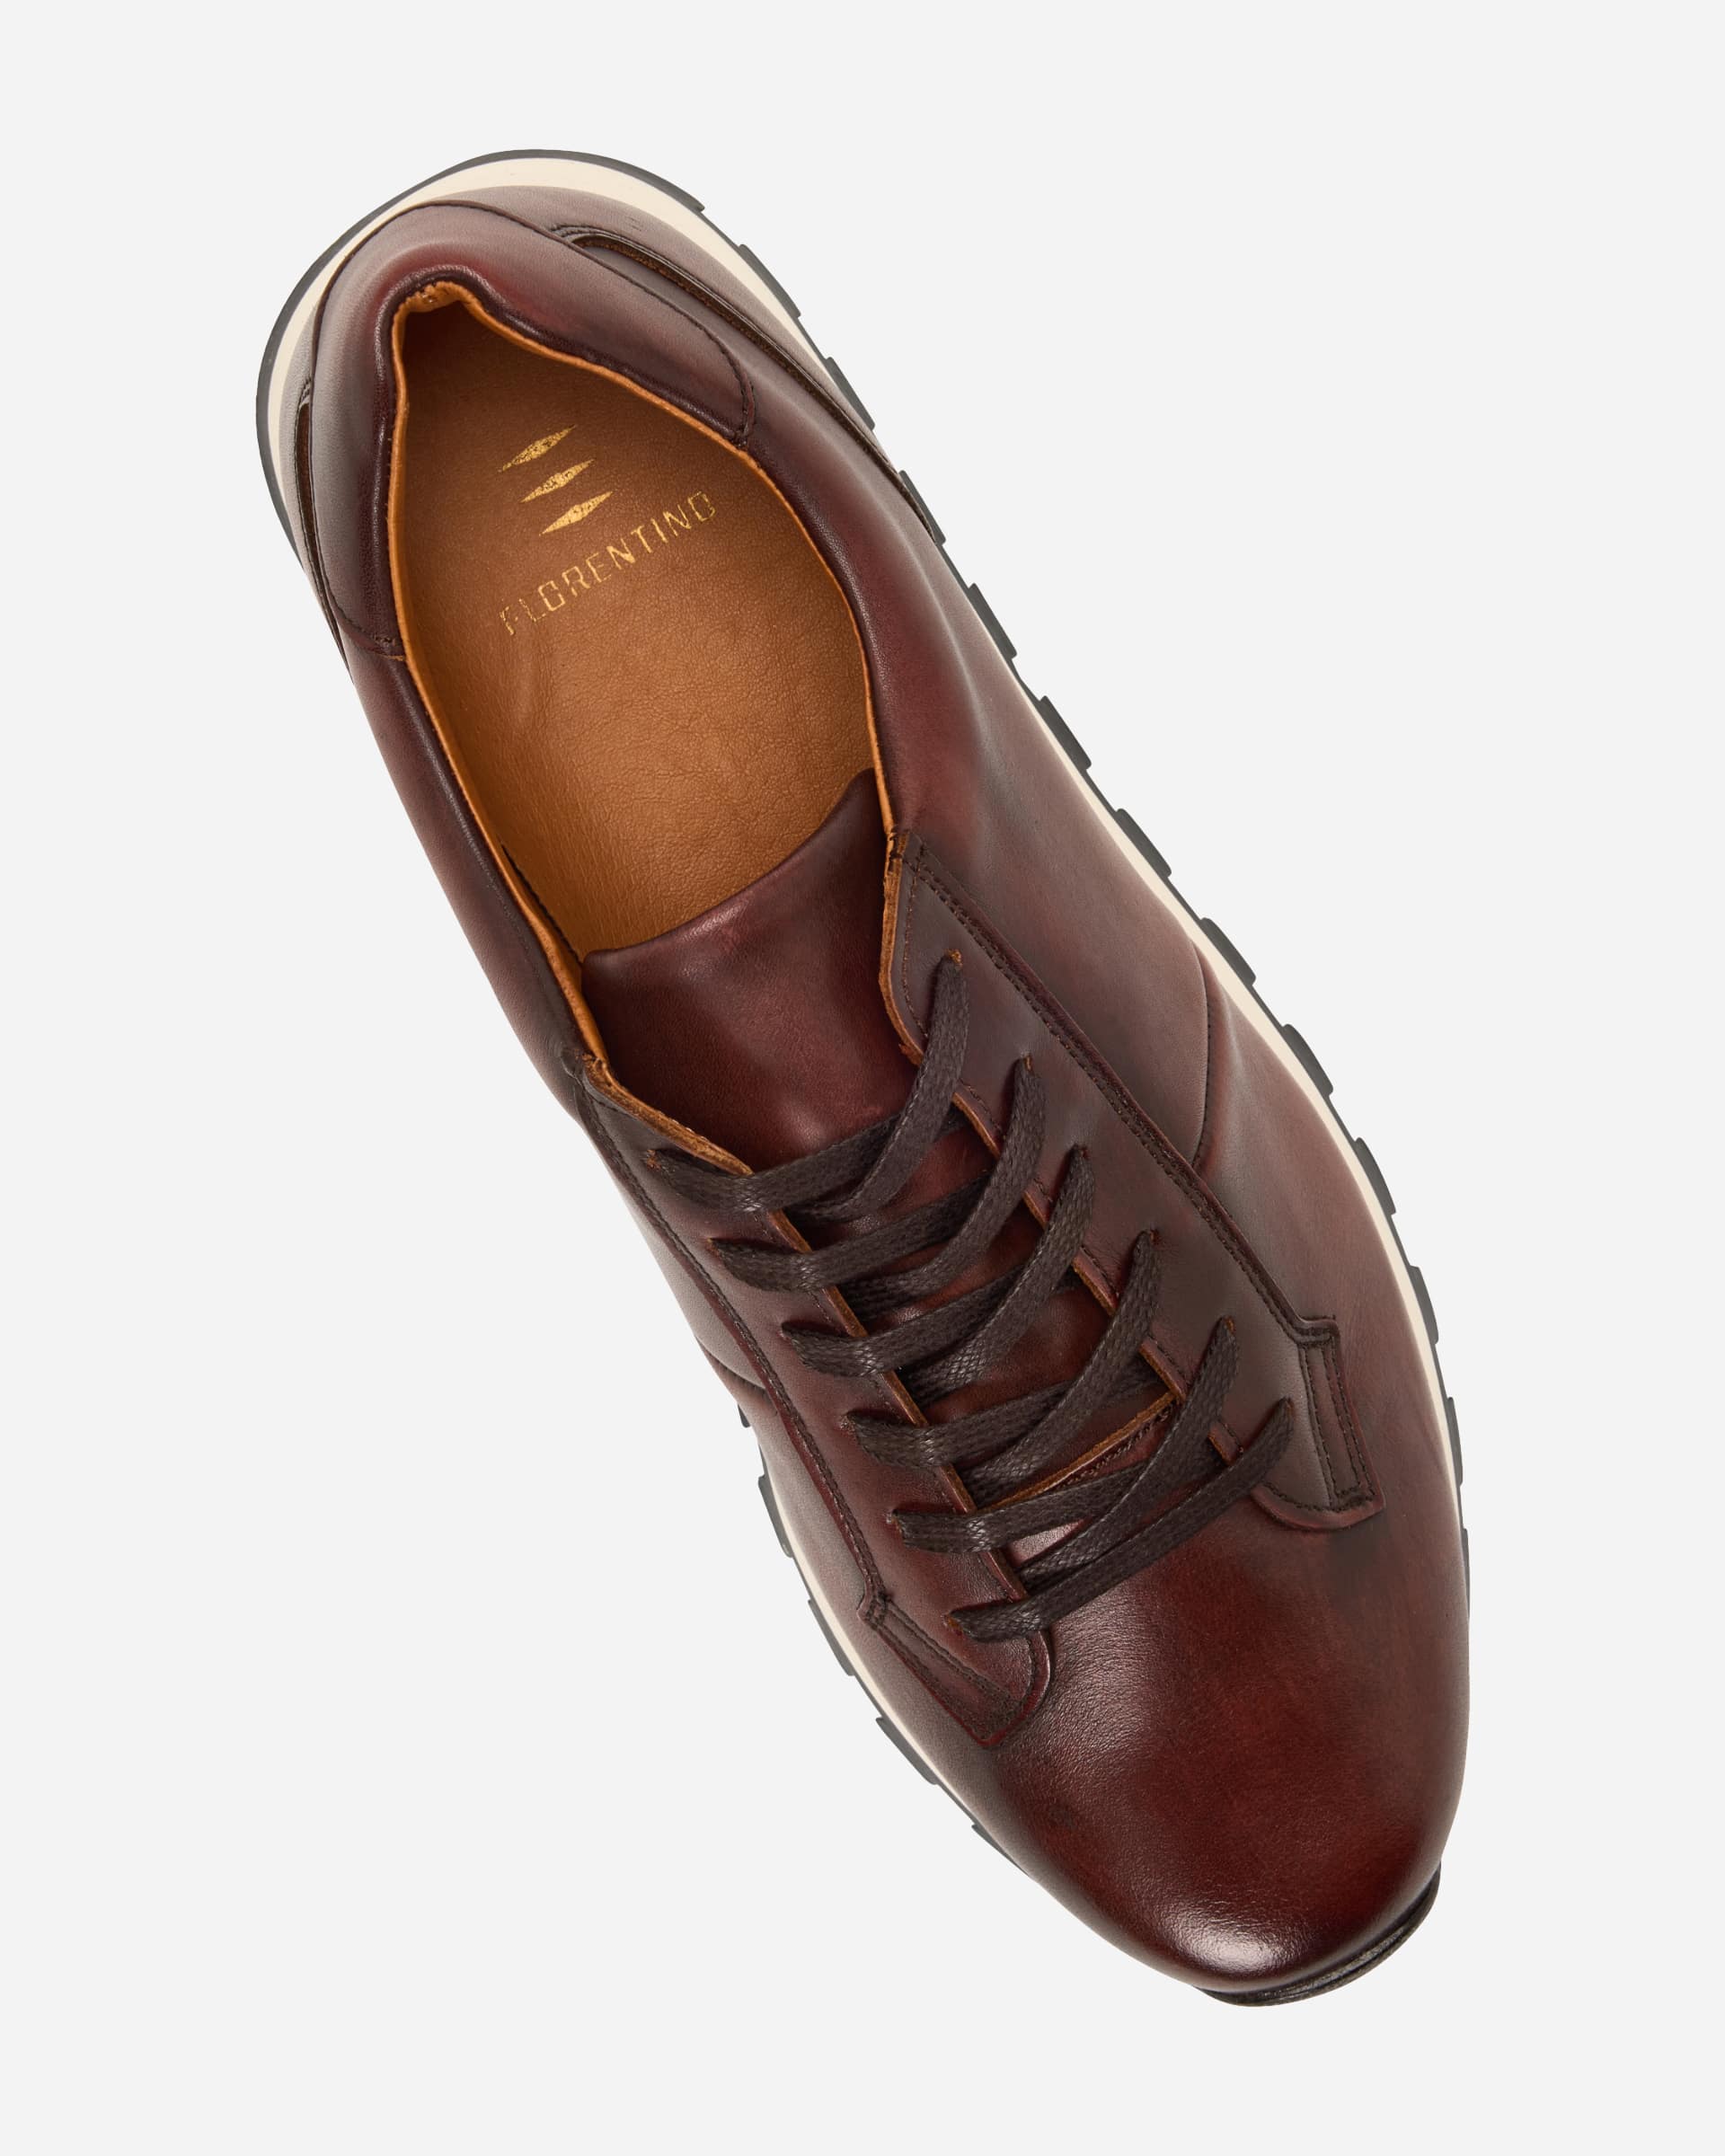 Florentino Sports Leather Sneaker - Men's Shoes at Menzclub